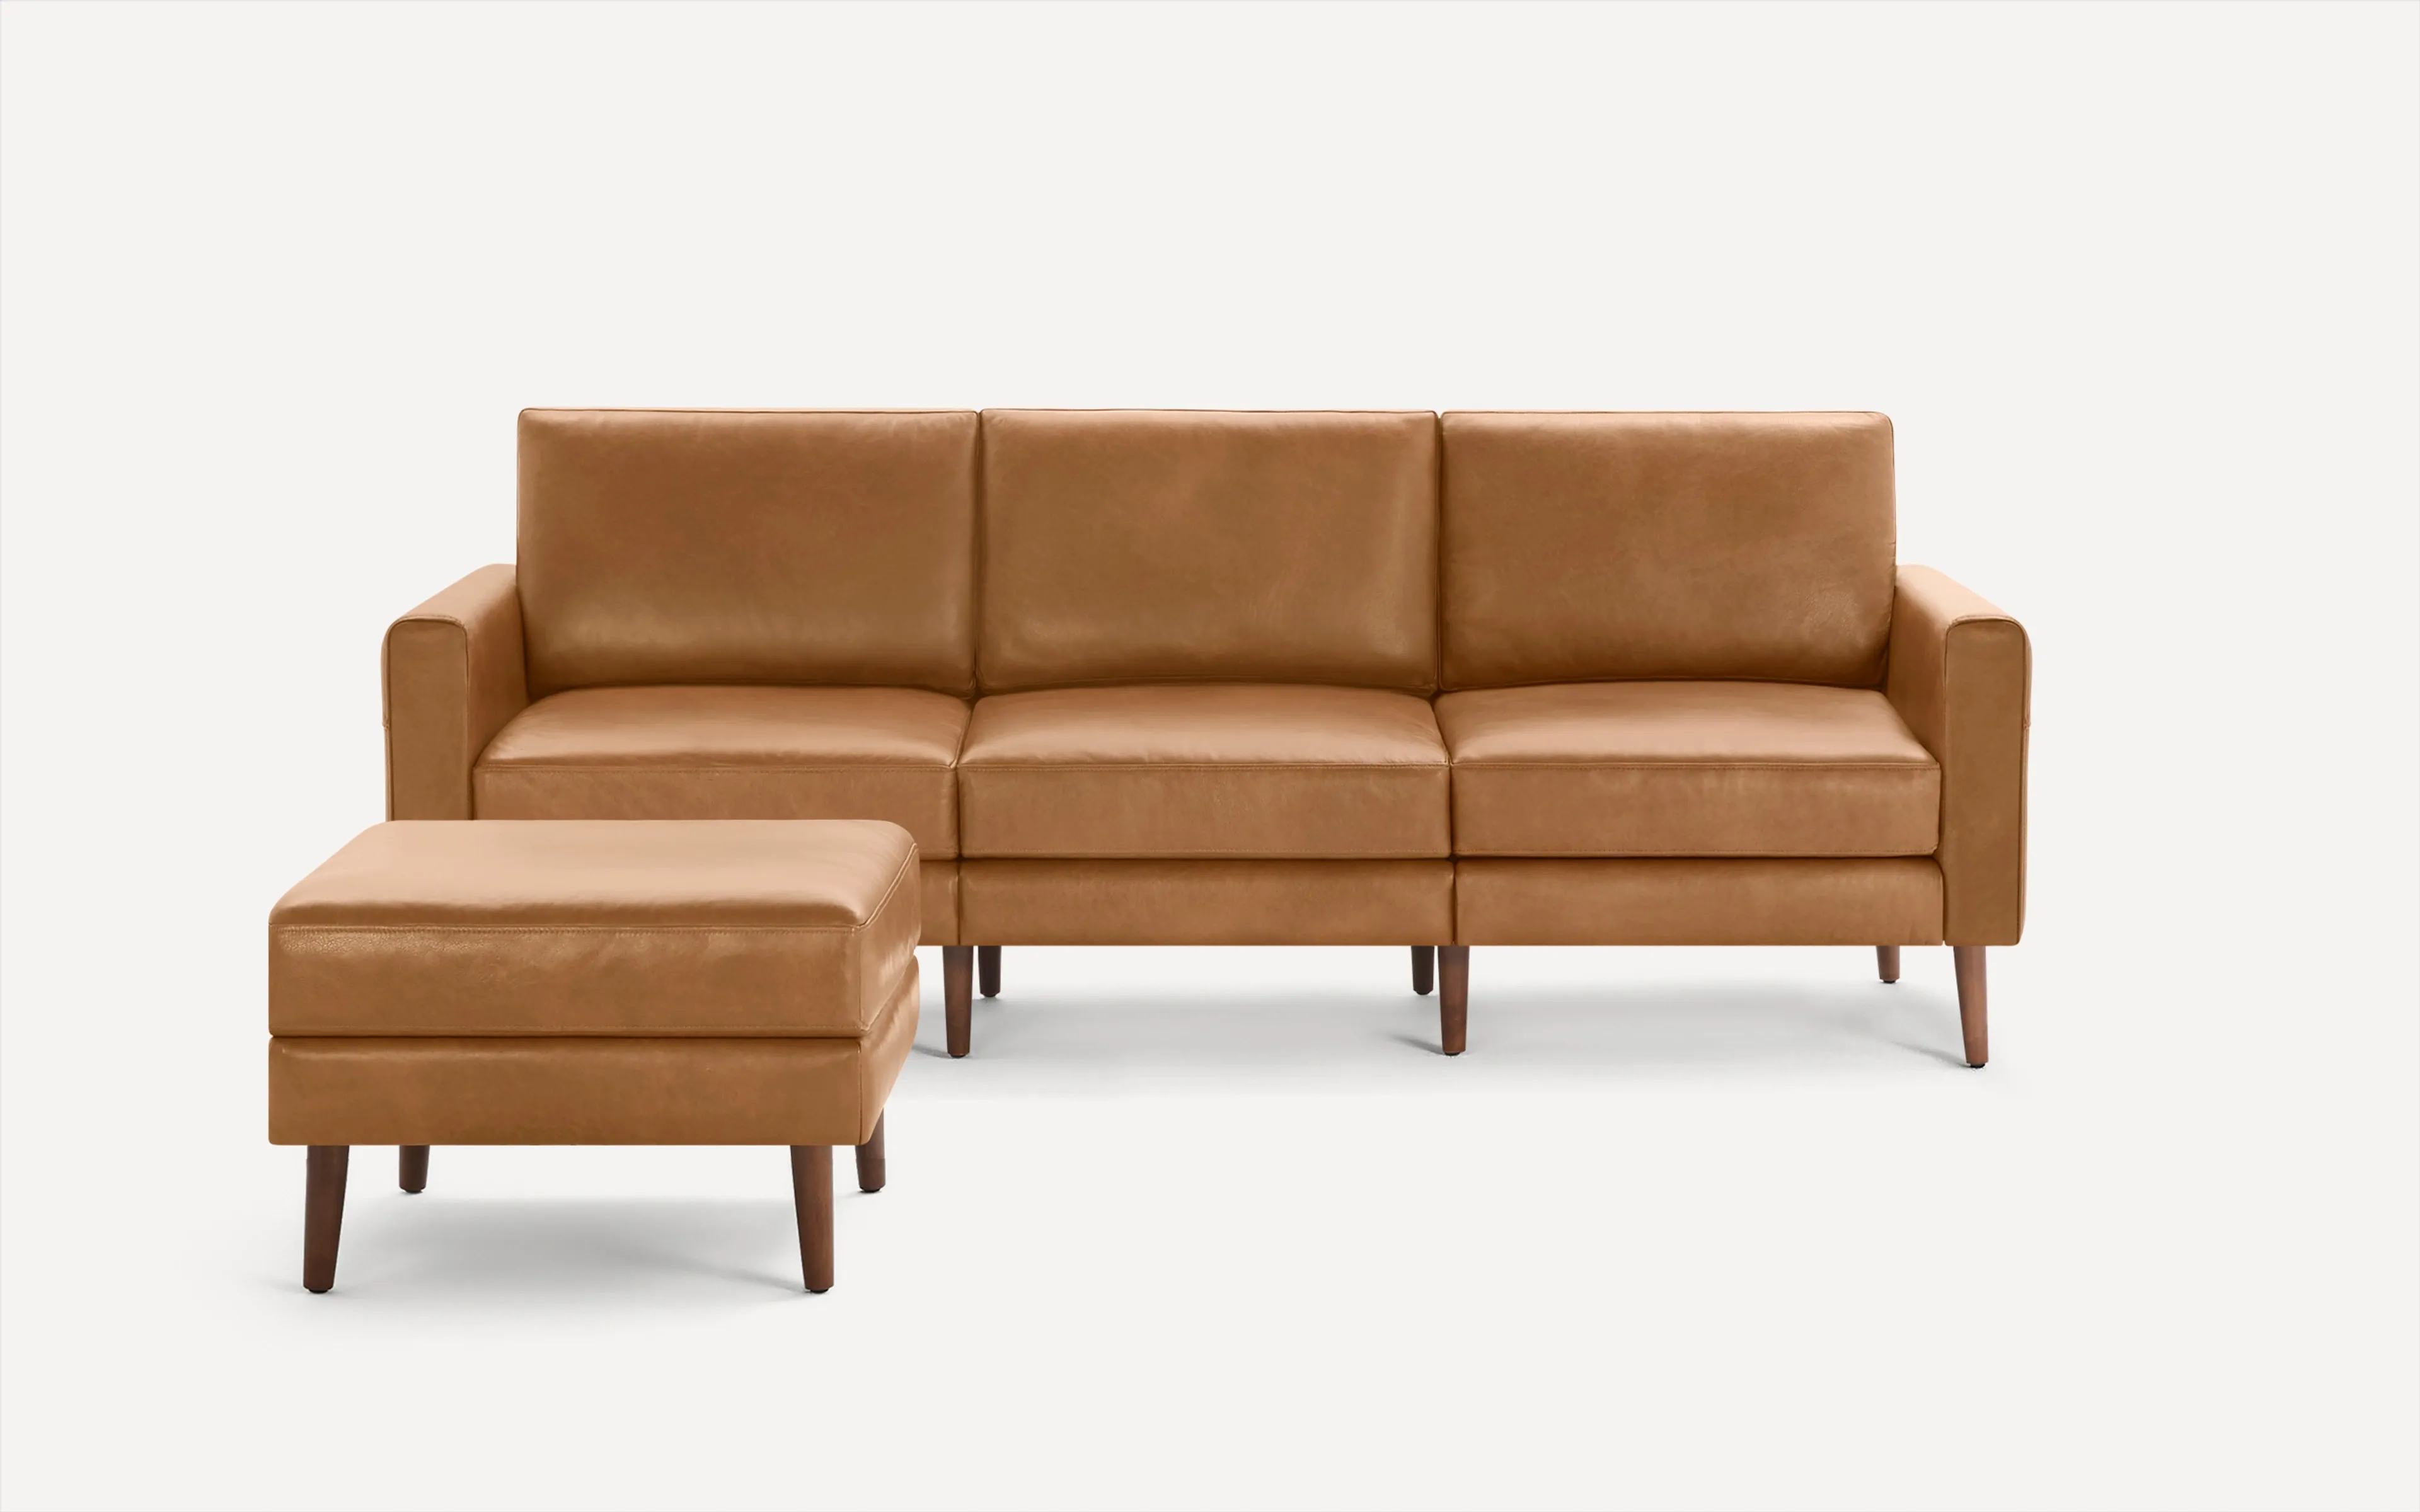 Original Nomad Sofa with Ottoman in Camel Leather